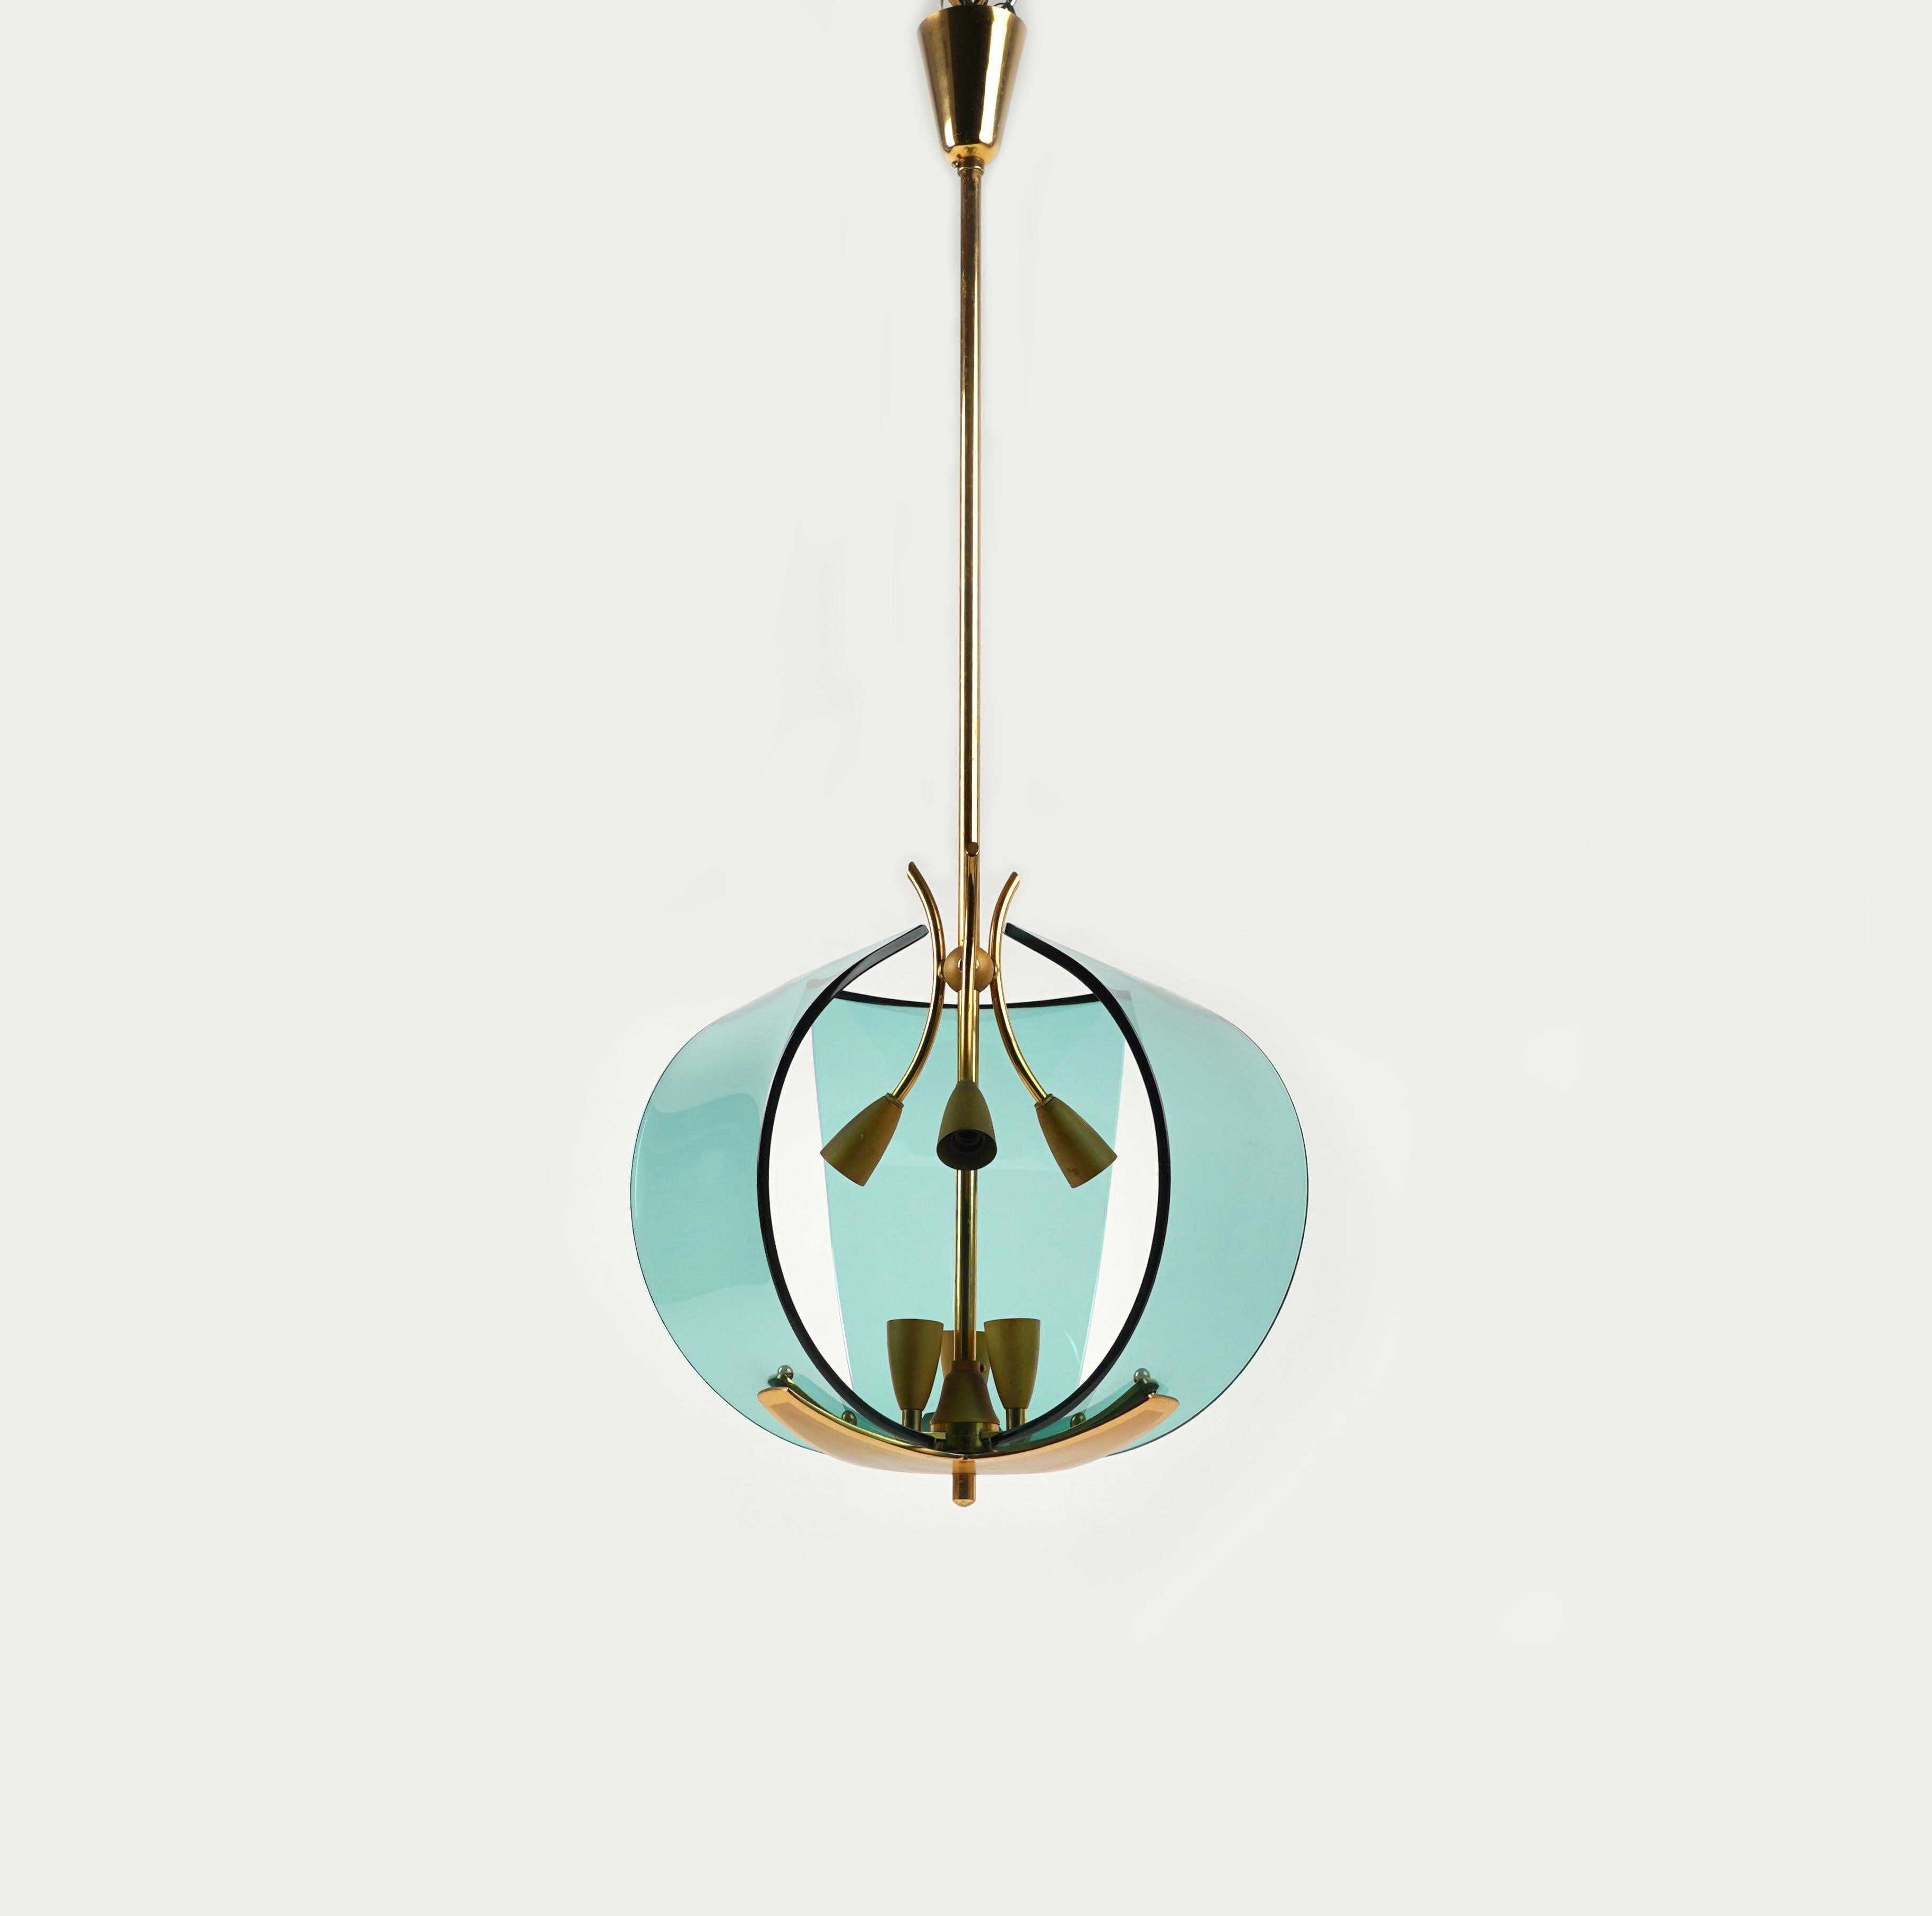 Mid-Century Modern Midcentury Chandelier in Brass and Glass by Fontana Arte, Italy, 1950s For Sale